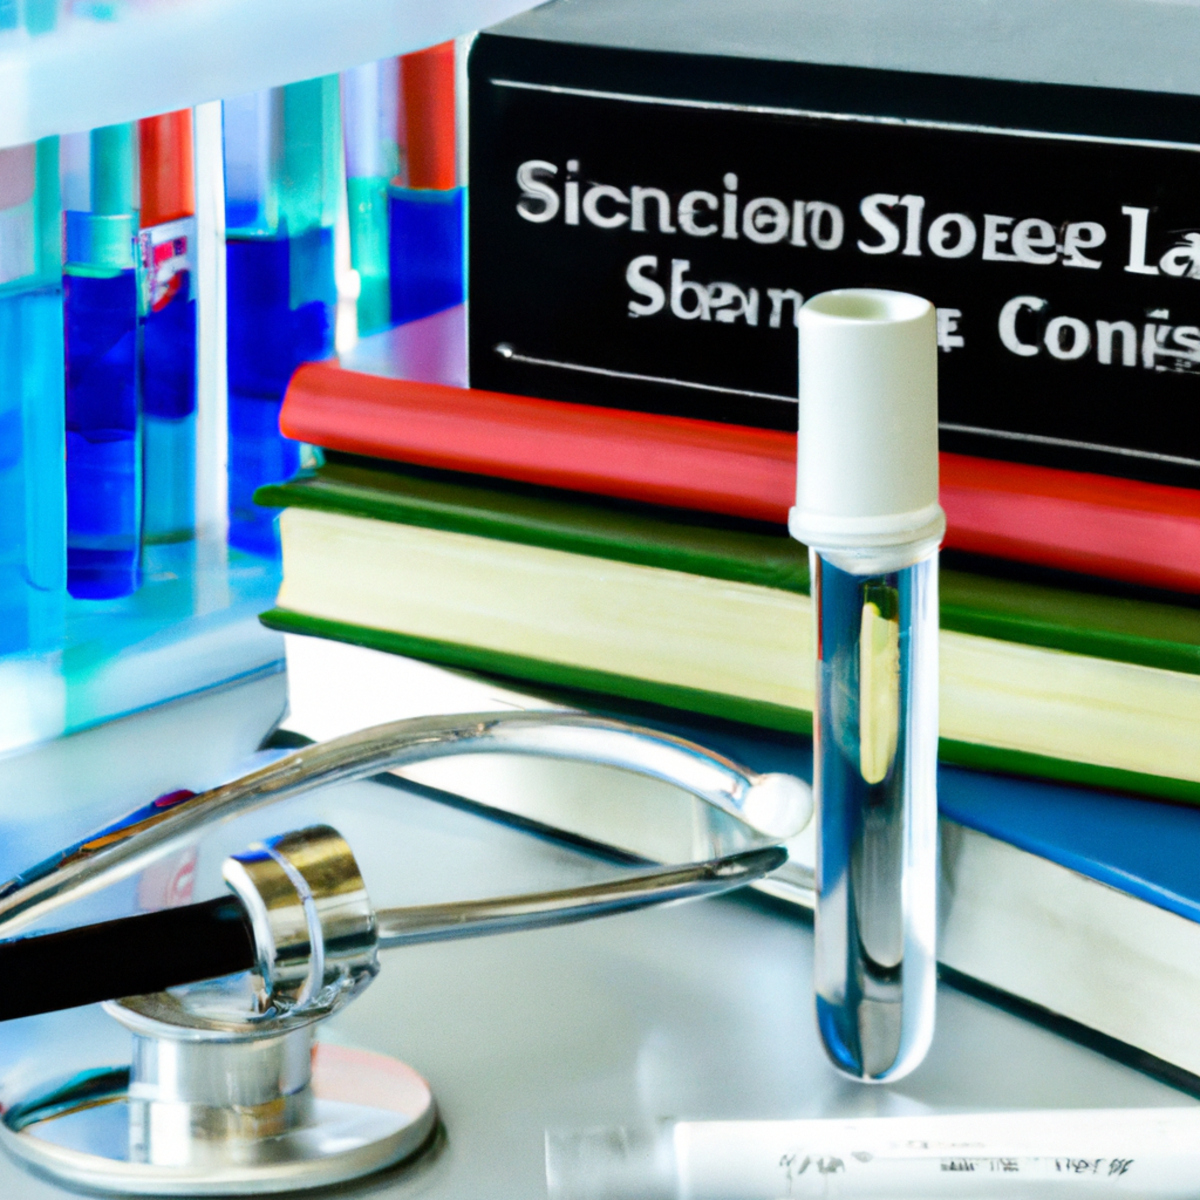 Scientific lab equipment and textbooks symbolize Zollinger-Ellison Syndrome diagnosis and treatment.